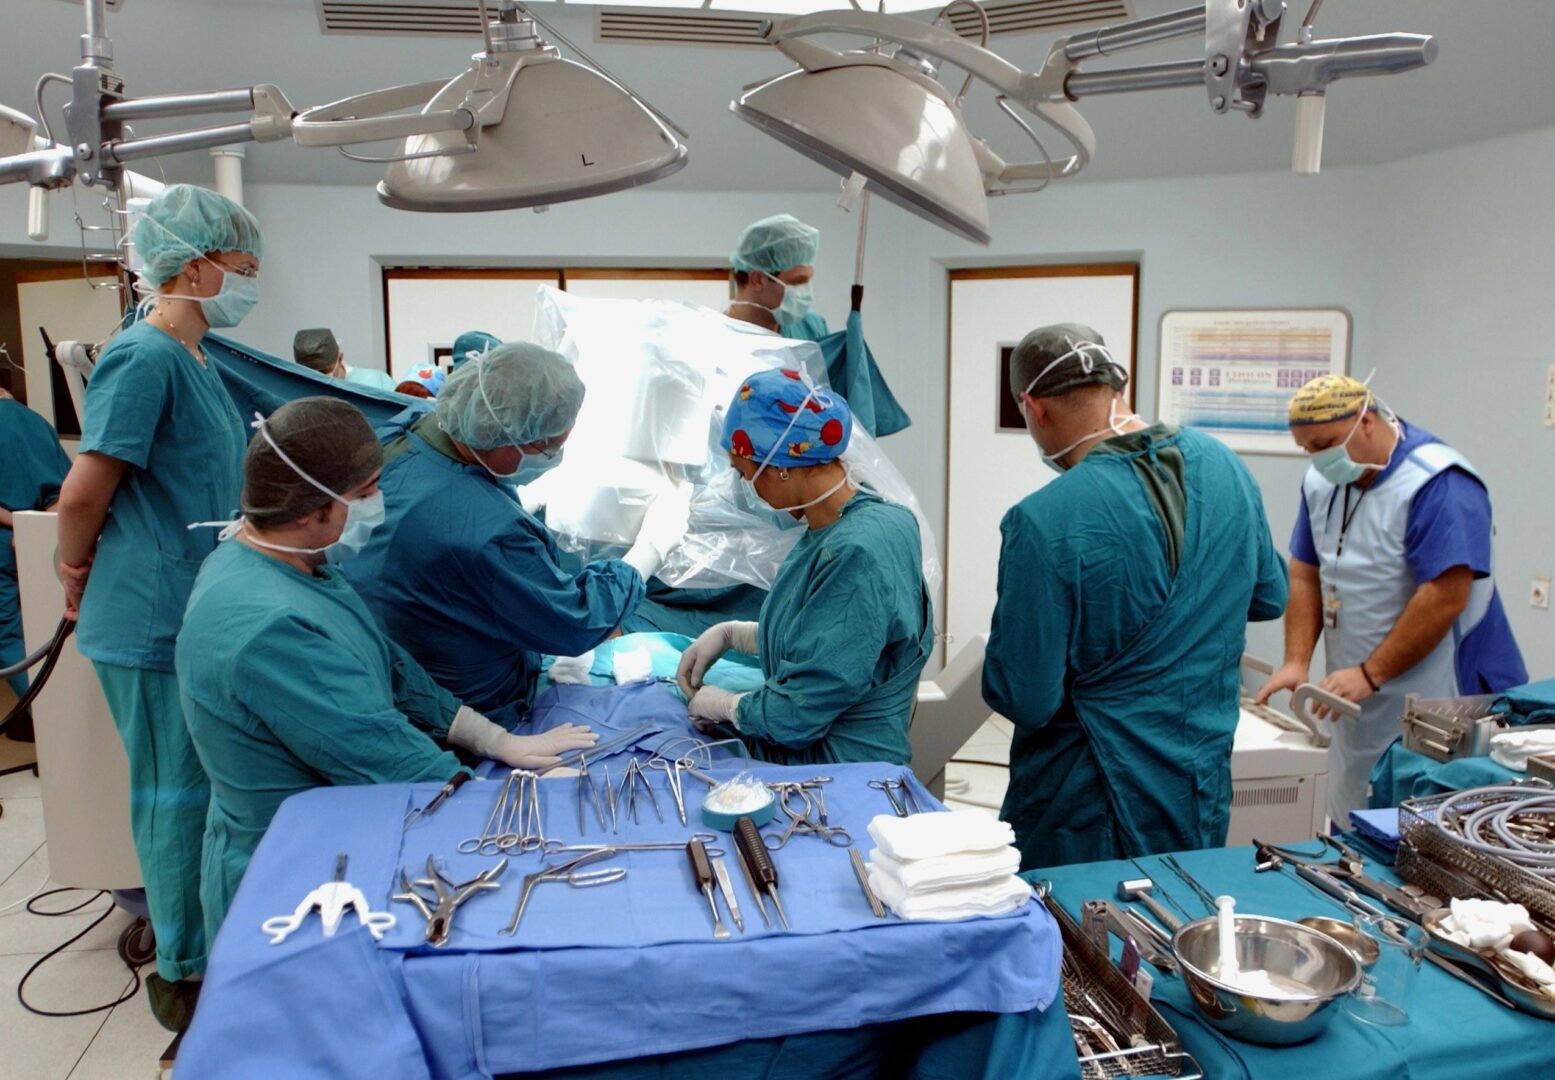 A group of surgeons in the operating room.